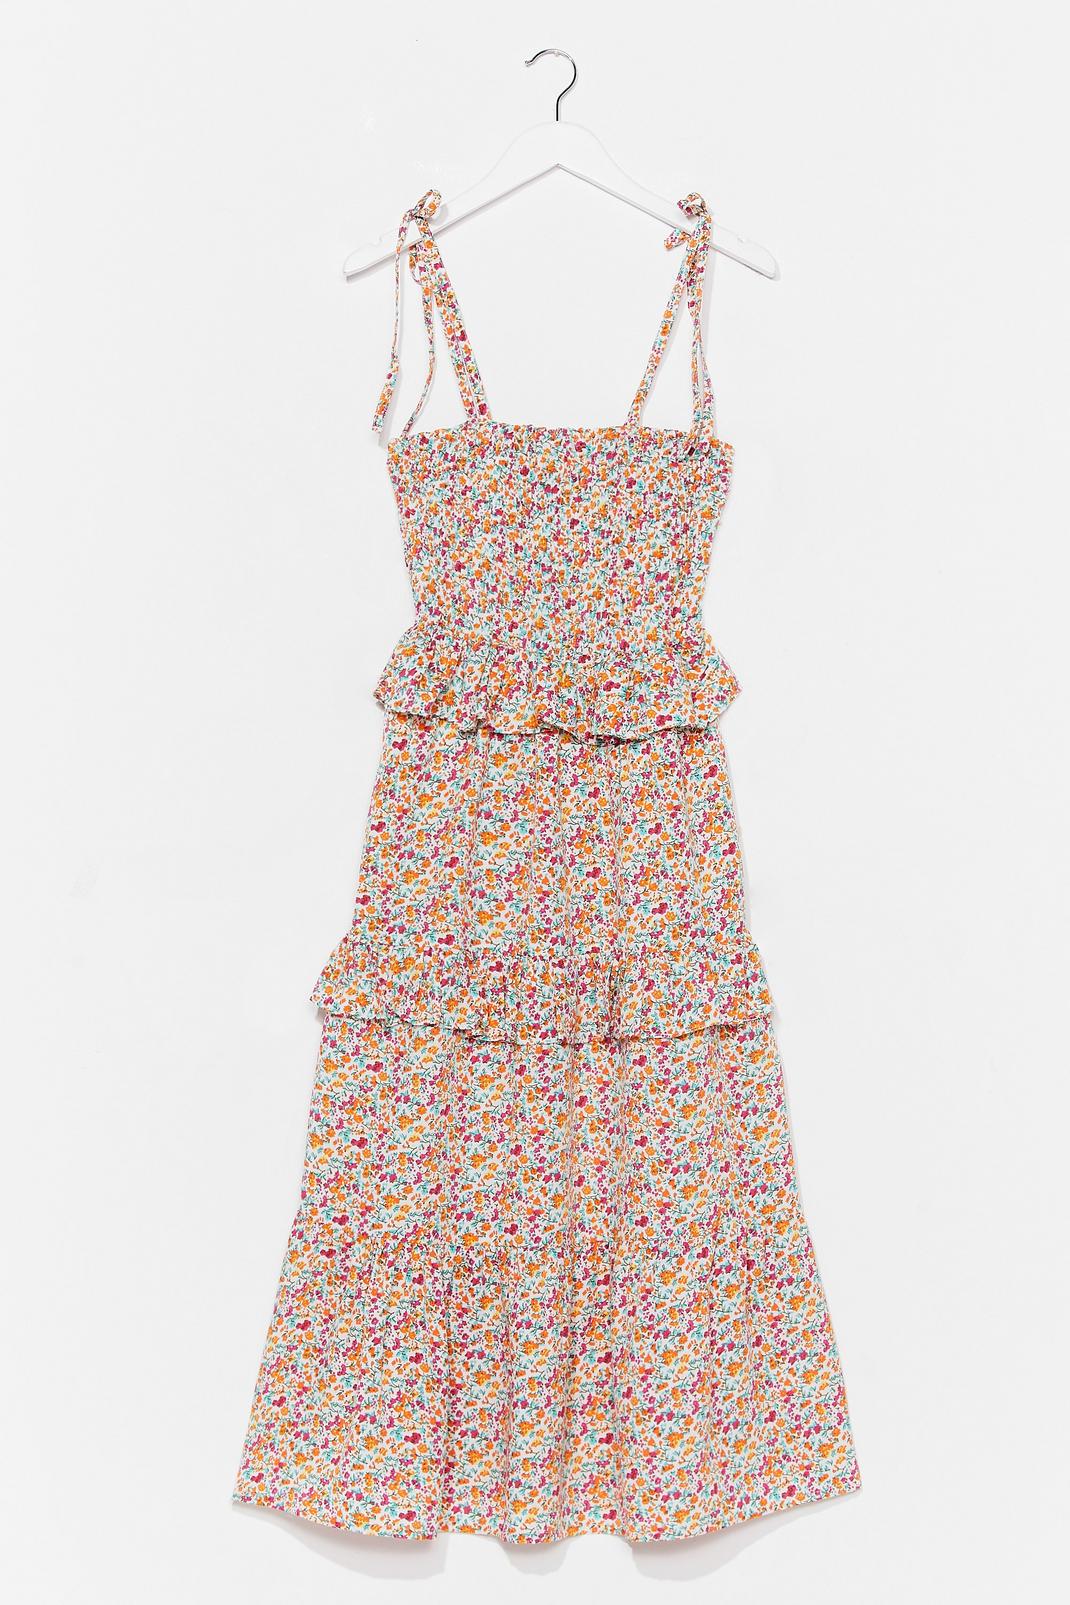 You've Got to Grow Me Love Floral Midi Dress image number 1